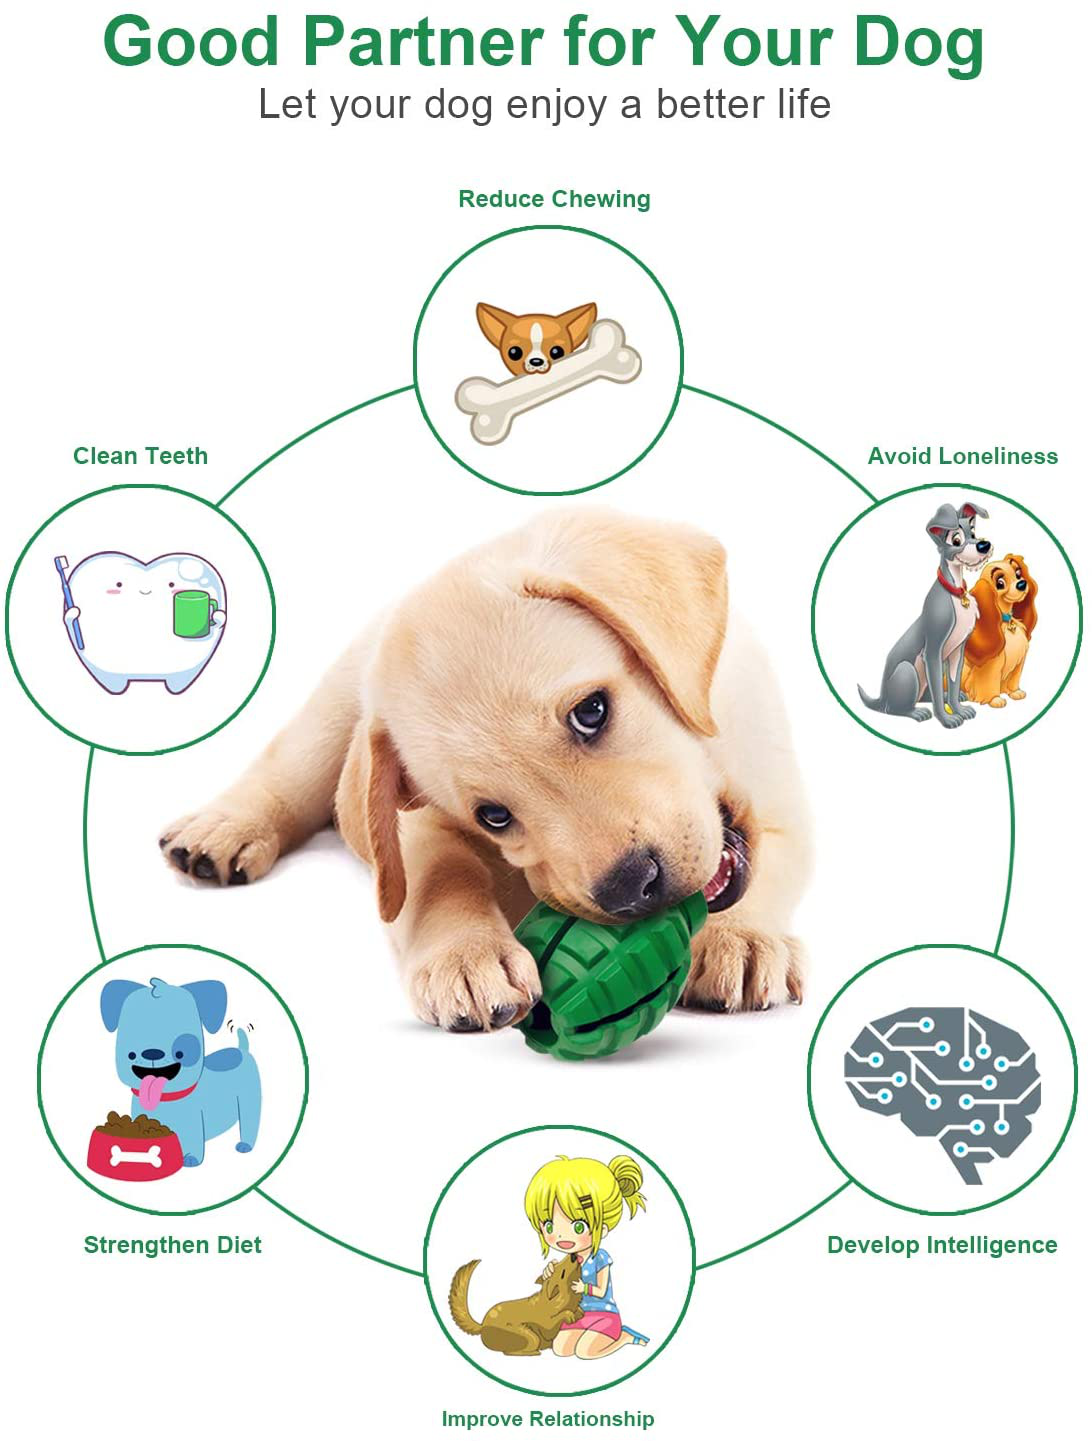 Dog Toys for Aggressive Chewers Large Breed, Lifetime Replacement